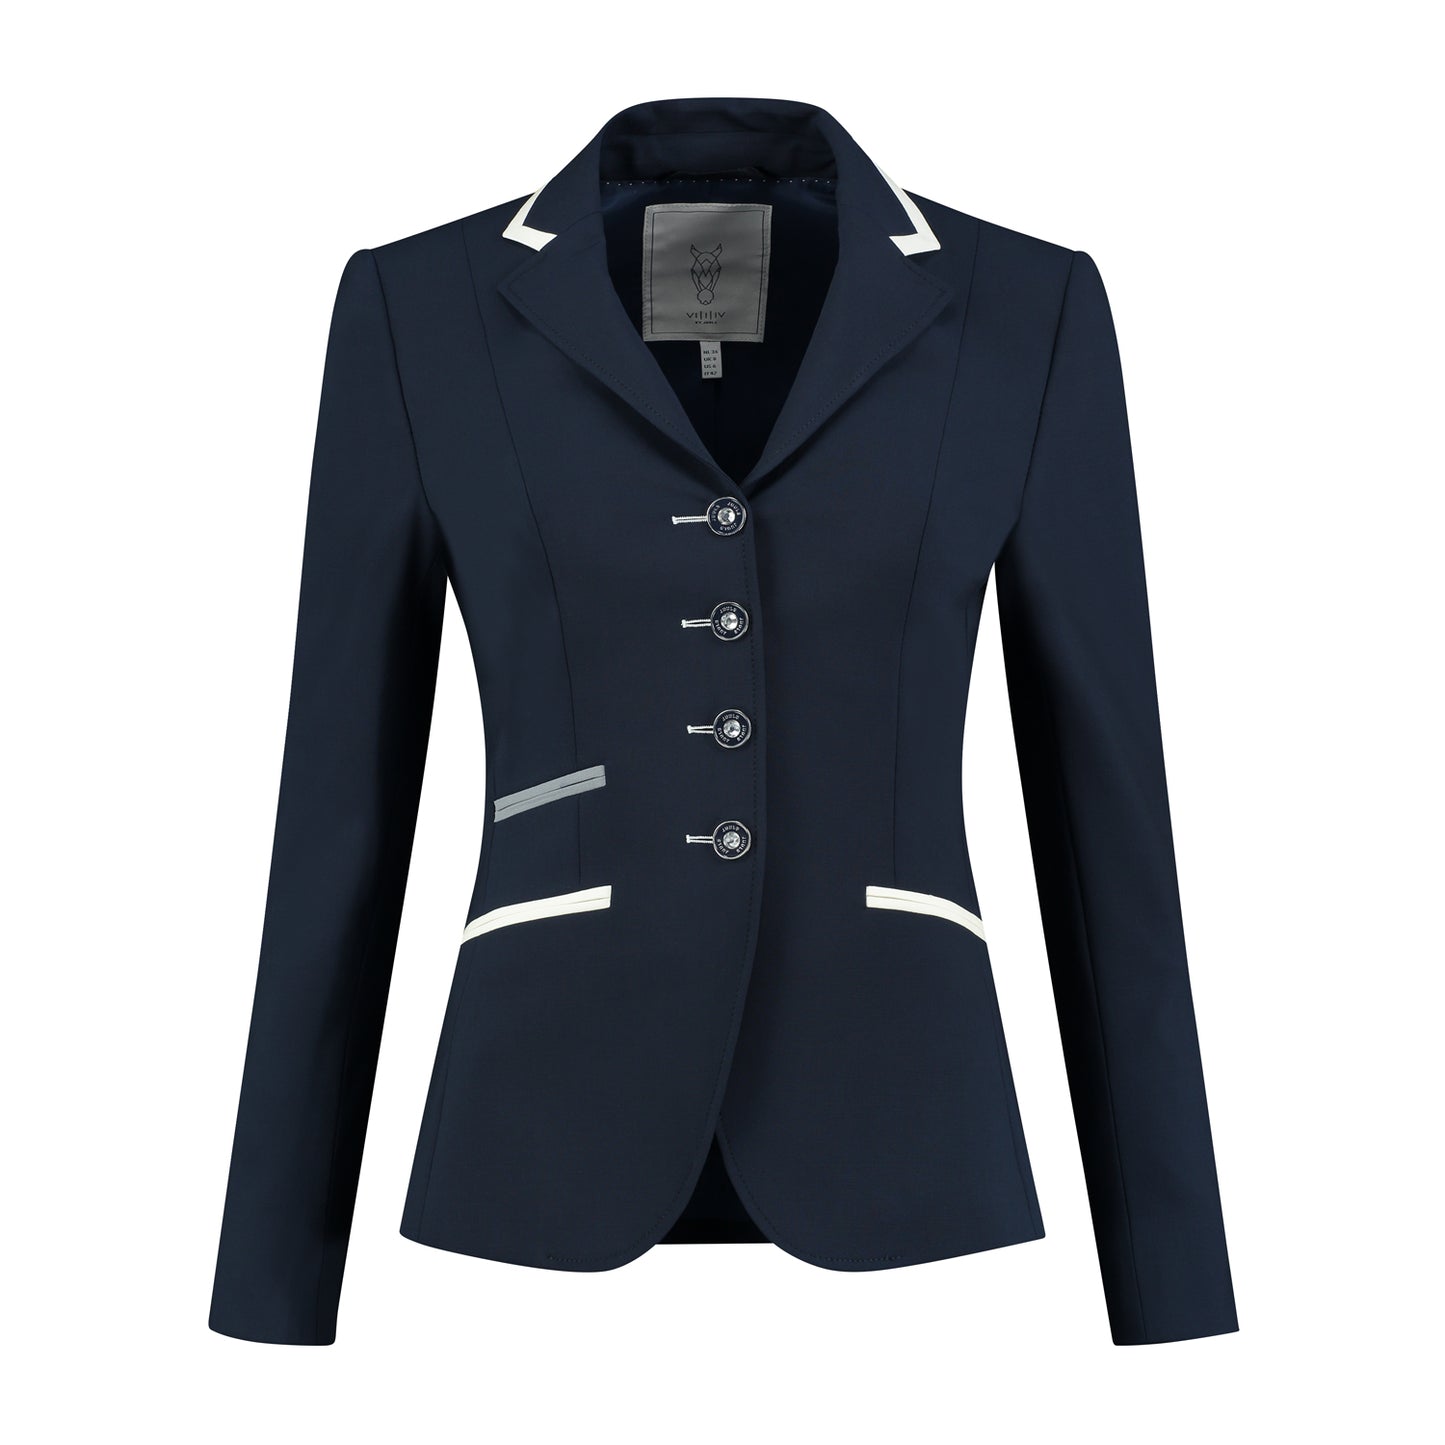 Navy competition jacket - white piping